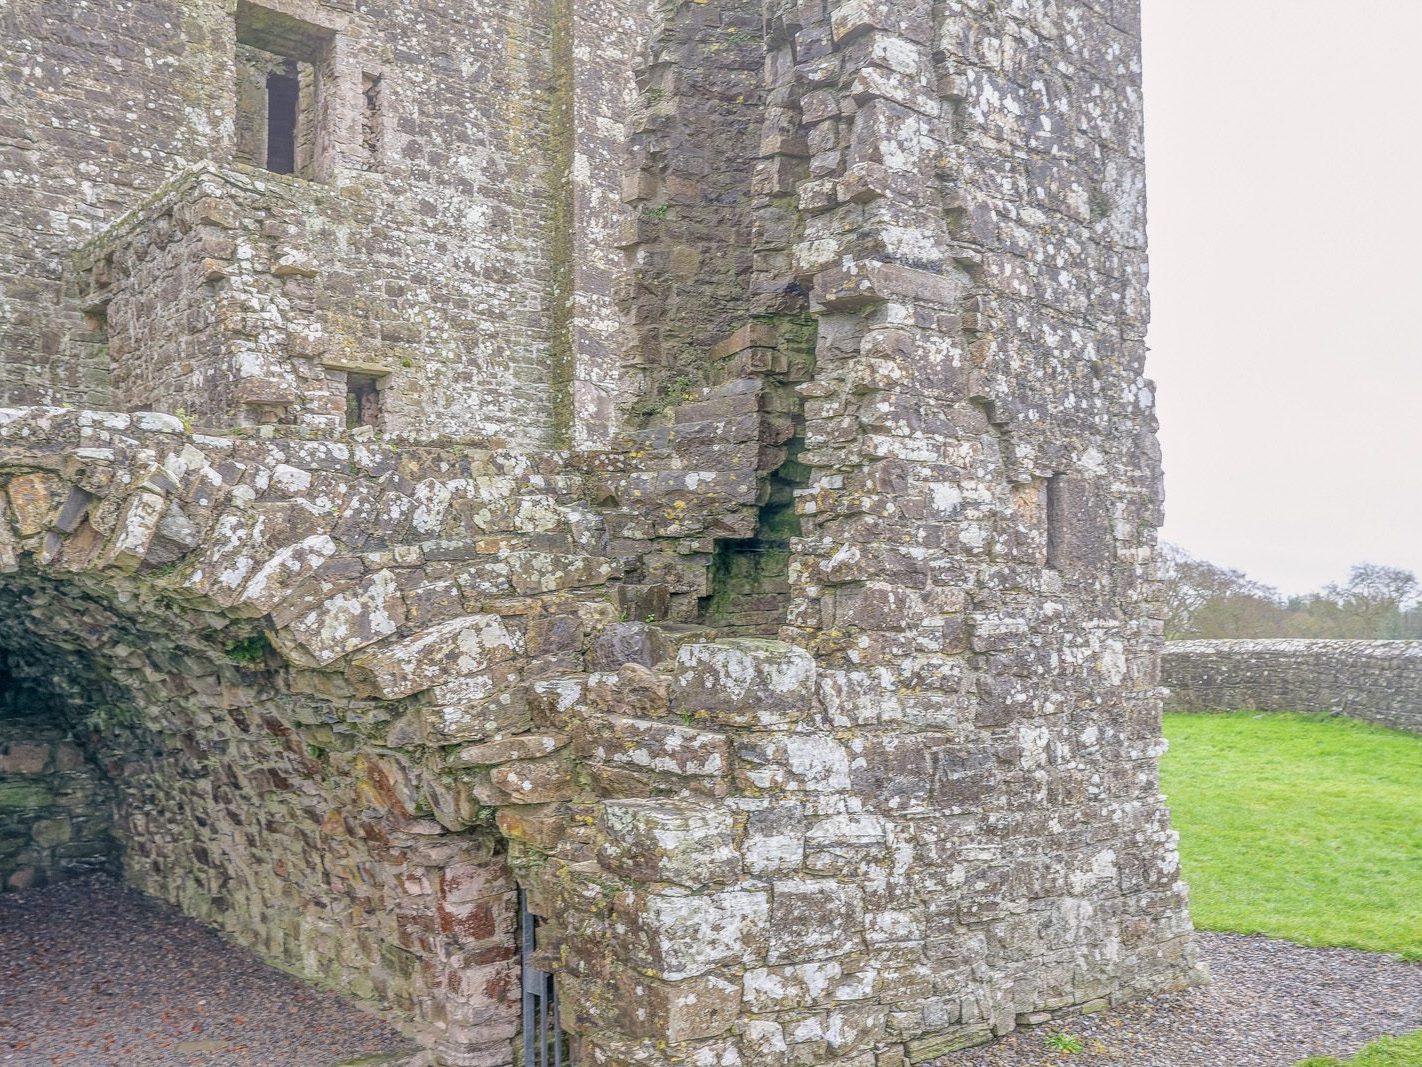 BECTIVE ABBEY WHICH I VISITED LAST CHRISTMAS [THERE WERE NO OTHER VISITORS AS IT WAS A VERY WET DAY]--225251-1